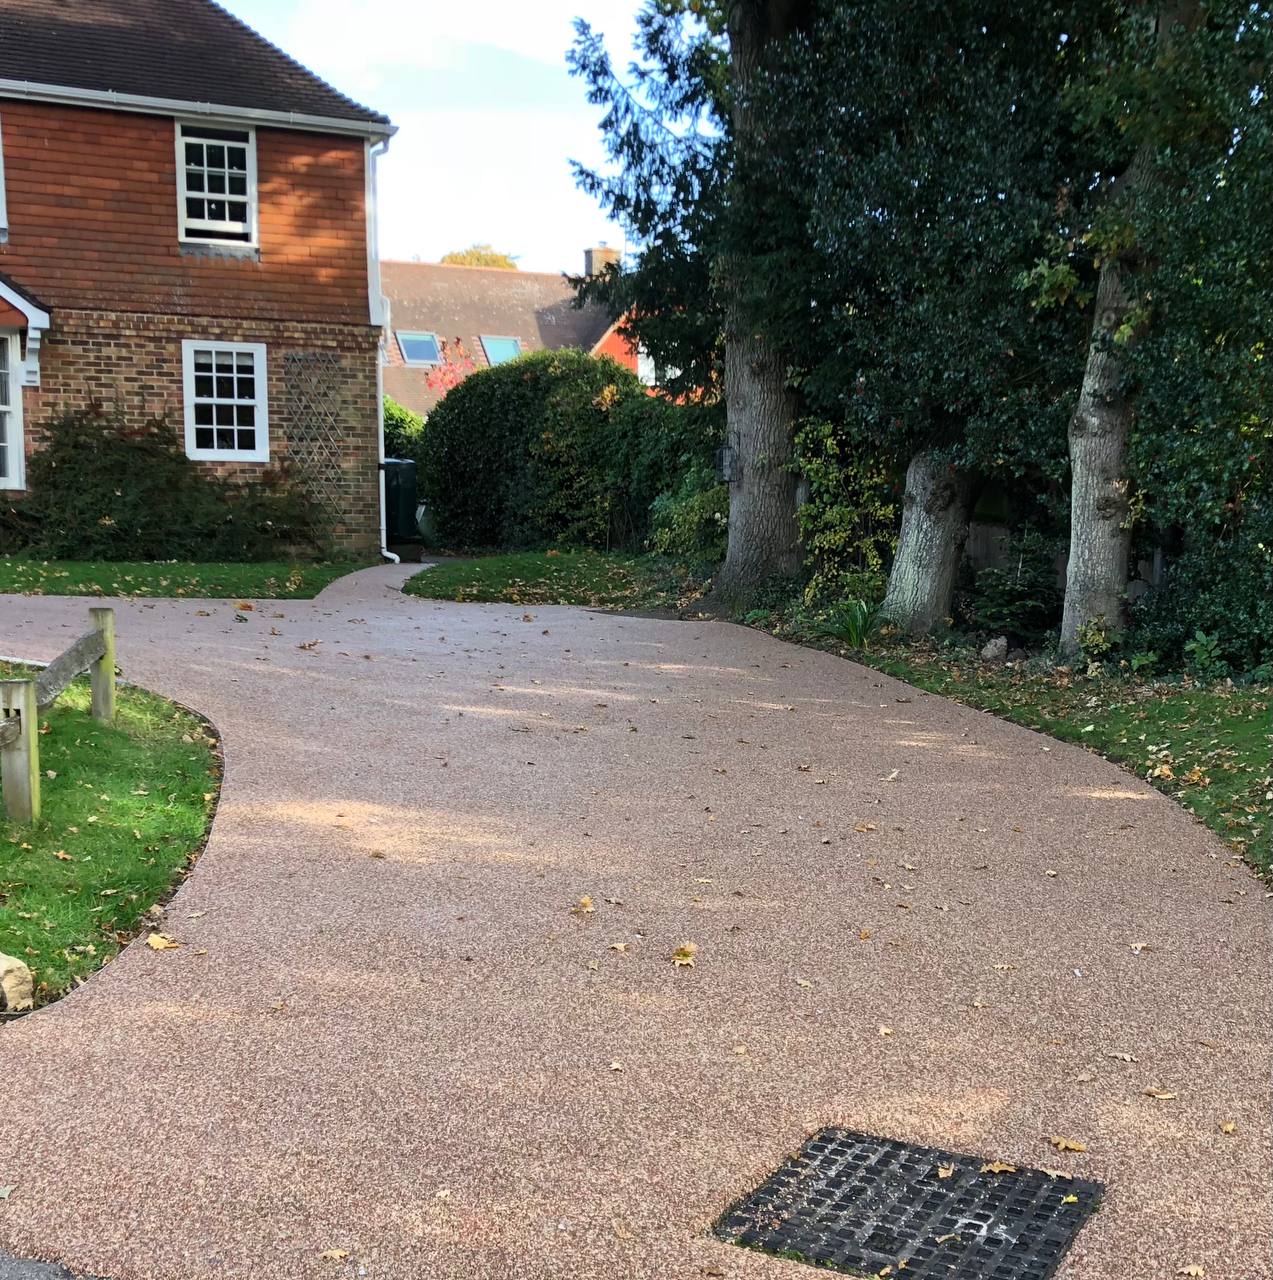 This is a photo of a Resin bound driveway carried out in a district of Huddersfield. All works done by Resin Driveways Huddersfield